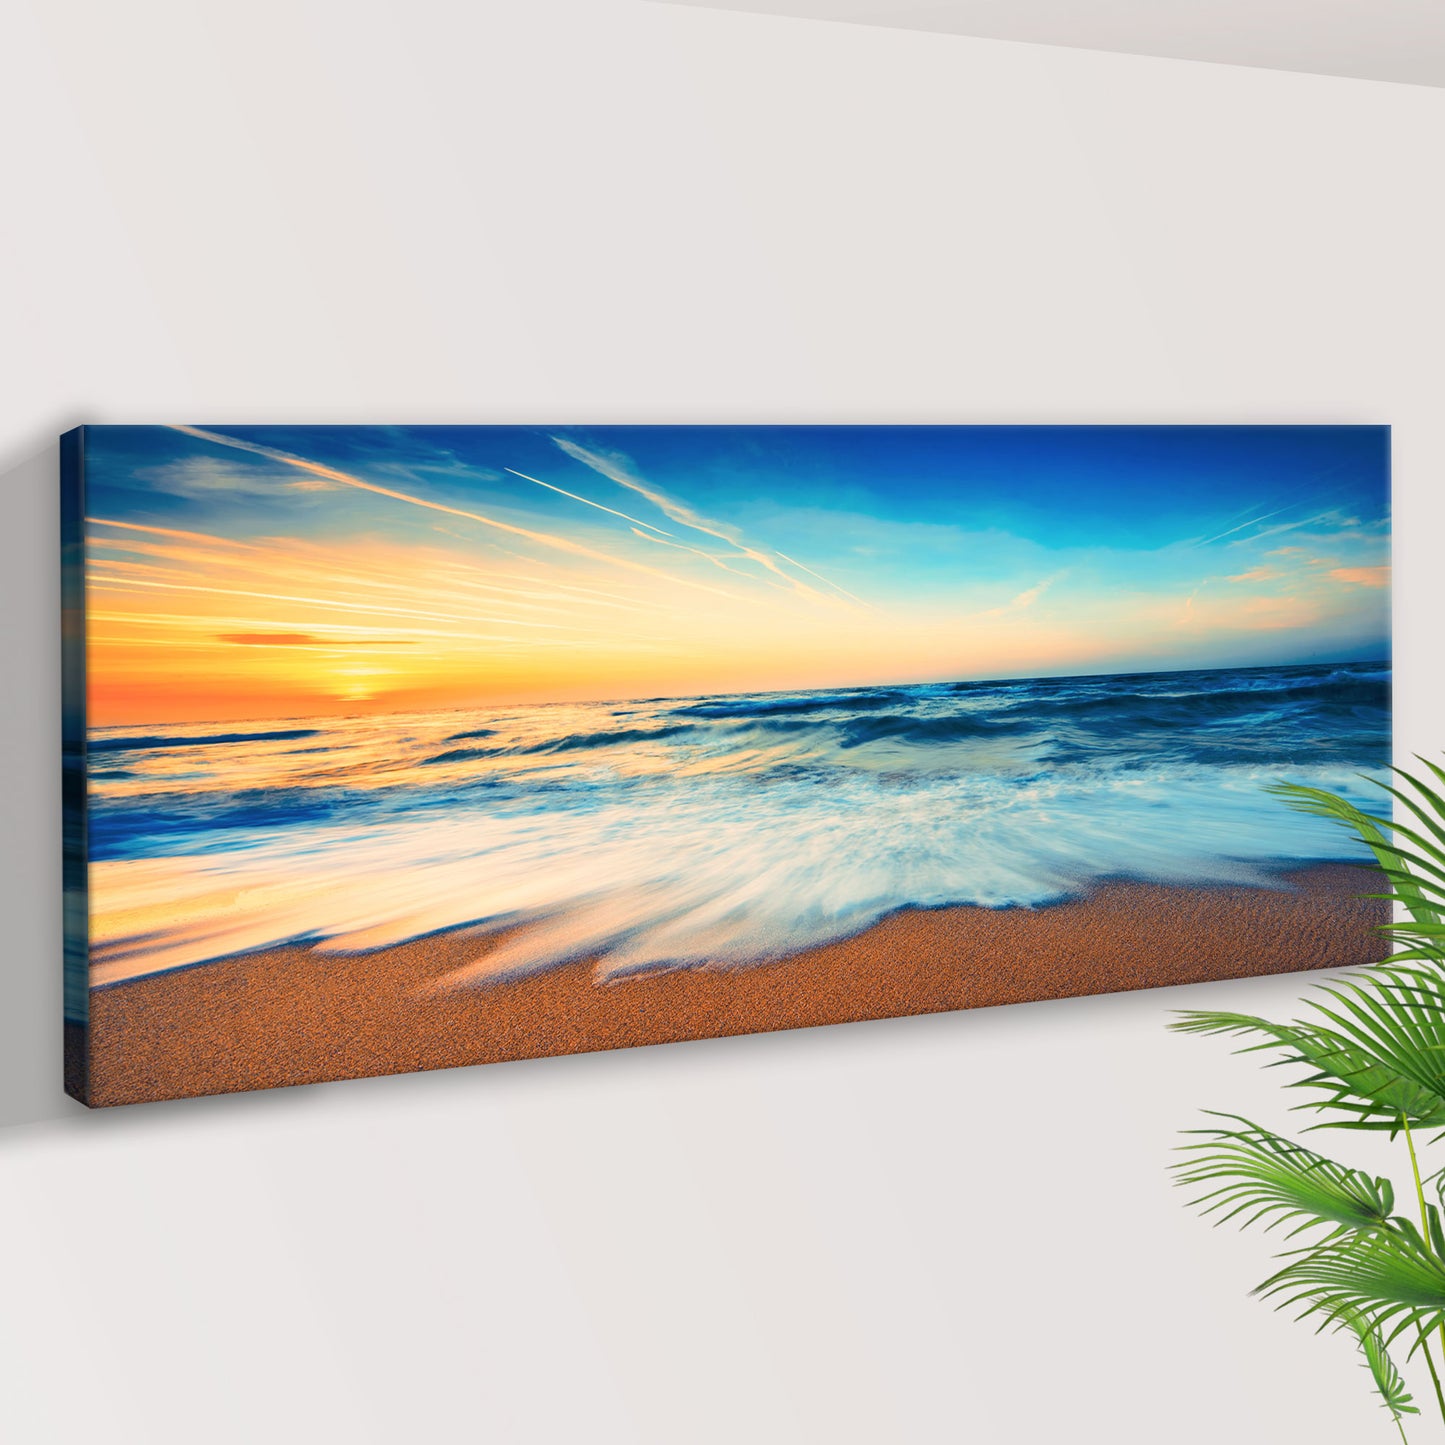 Ocean Beach Sunset Canvas Wall Art Style 1 - Image by Tailored Canvases